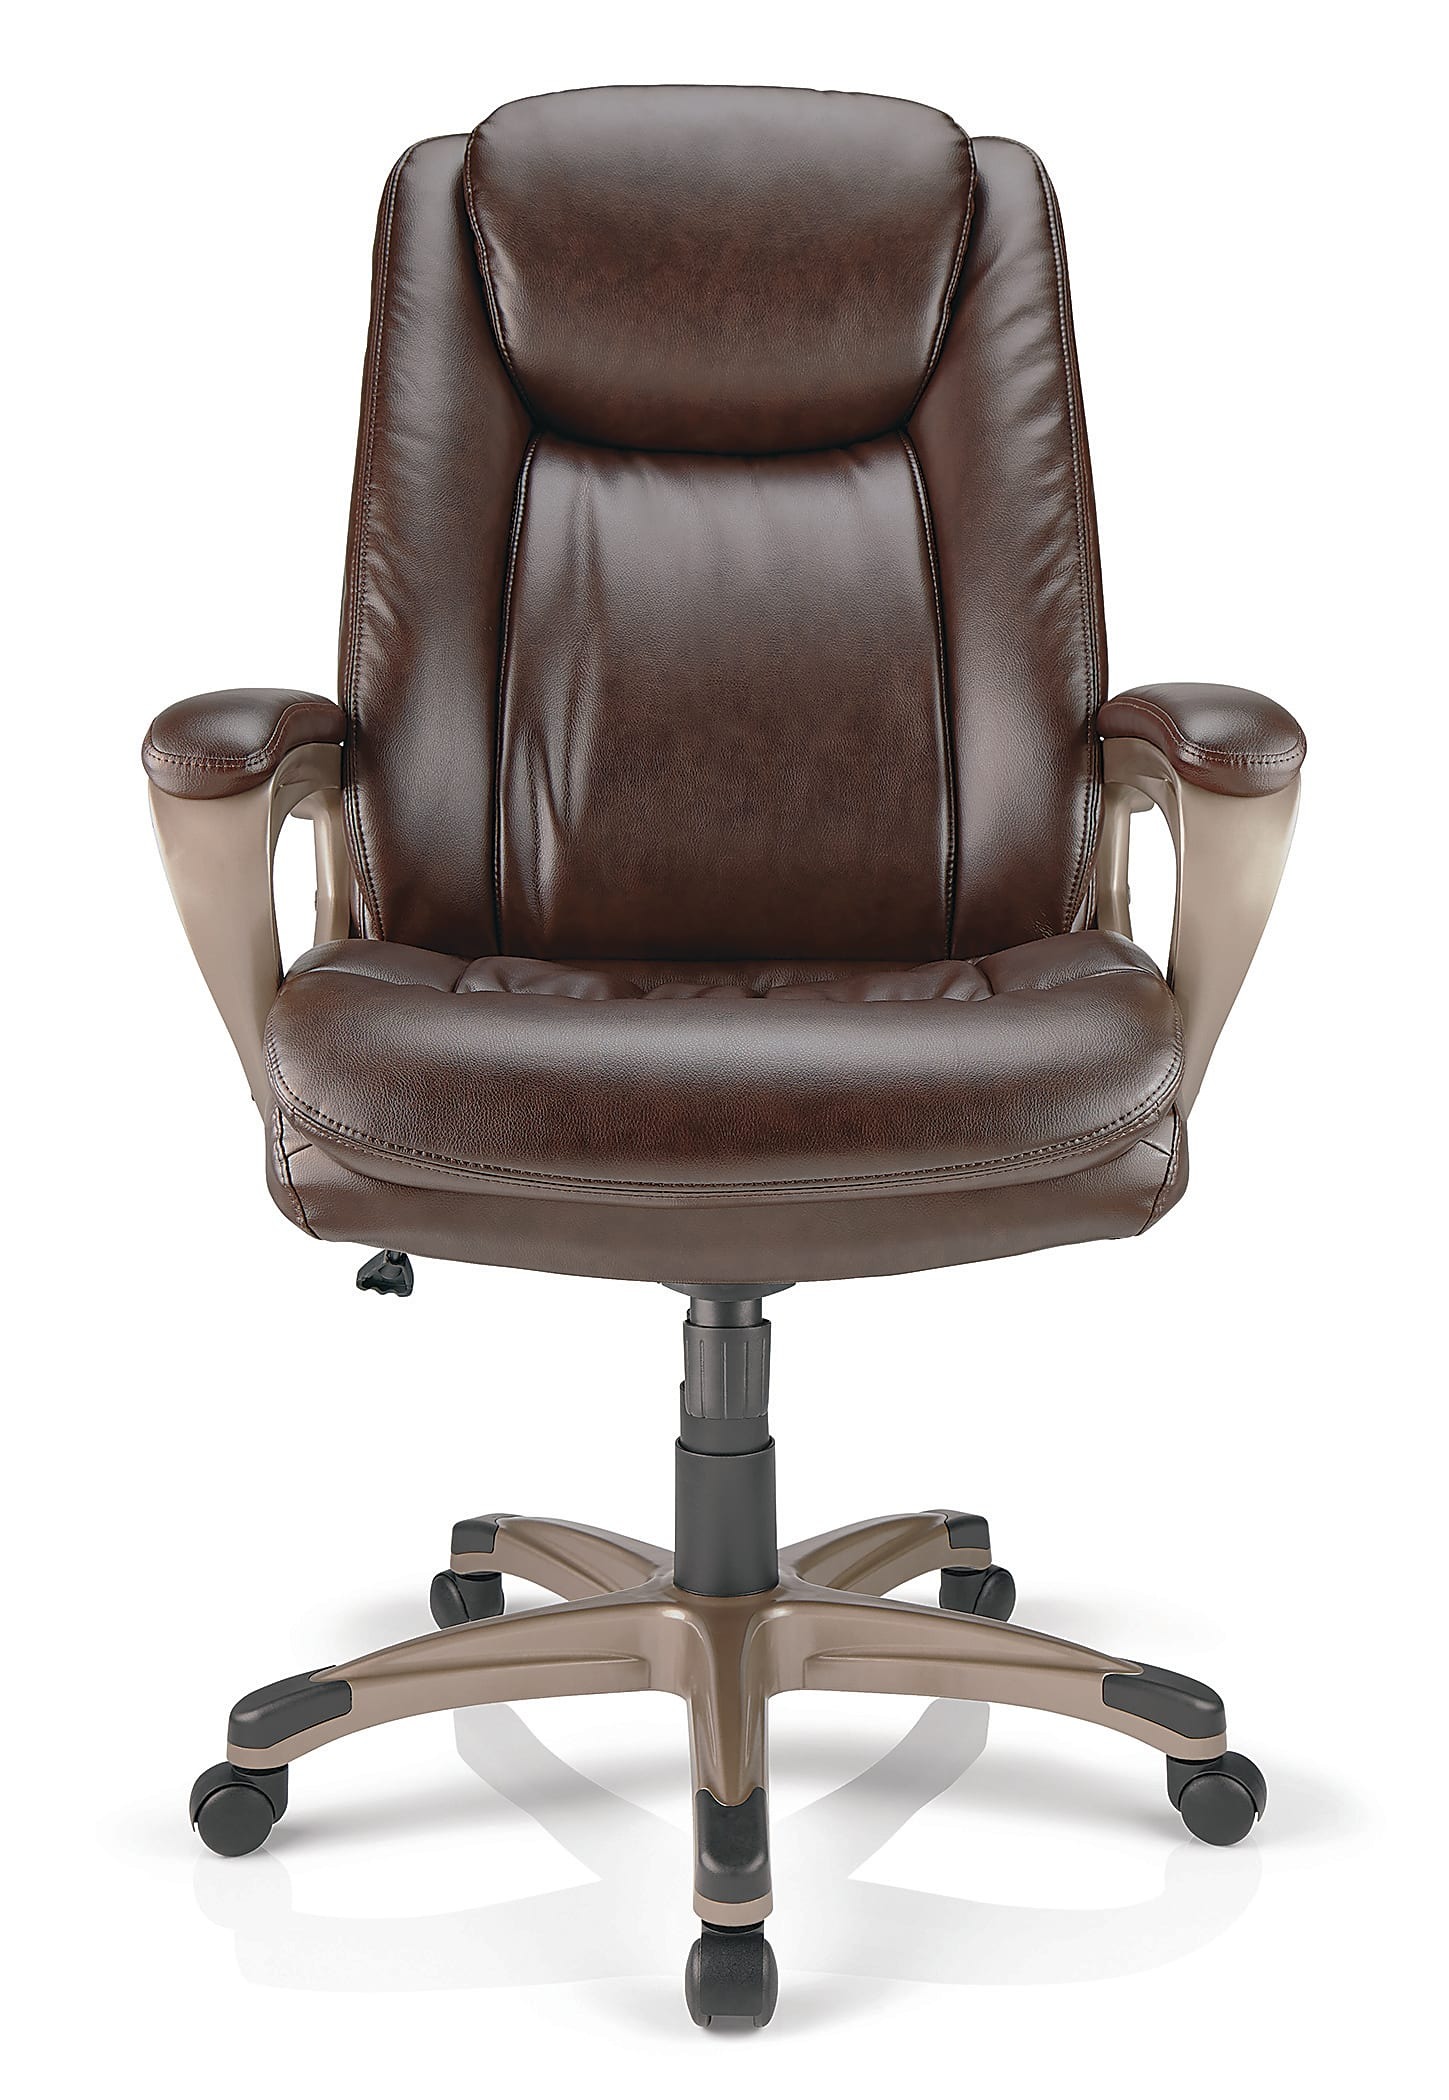 Realspace® Treswell Bonded Leather High-Back Executive Chair $129.99